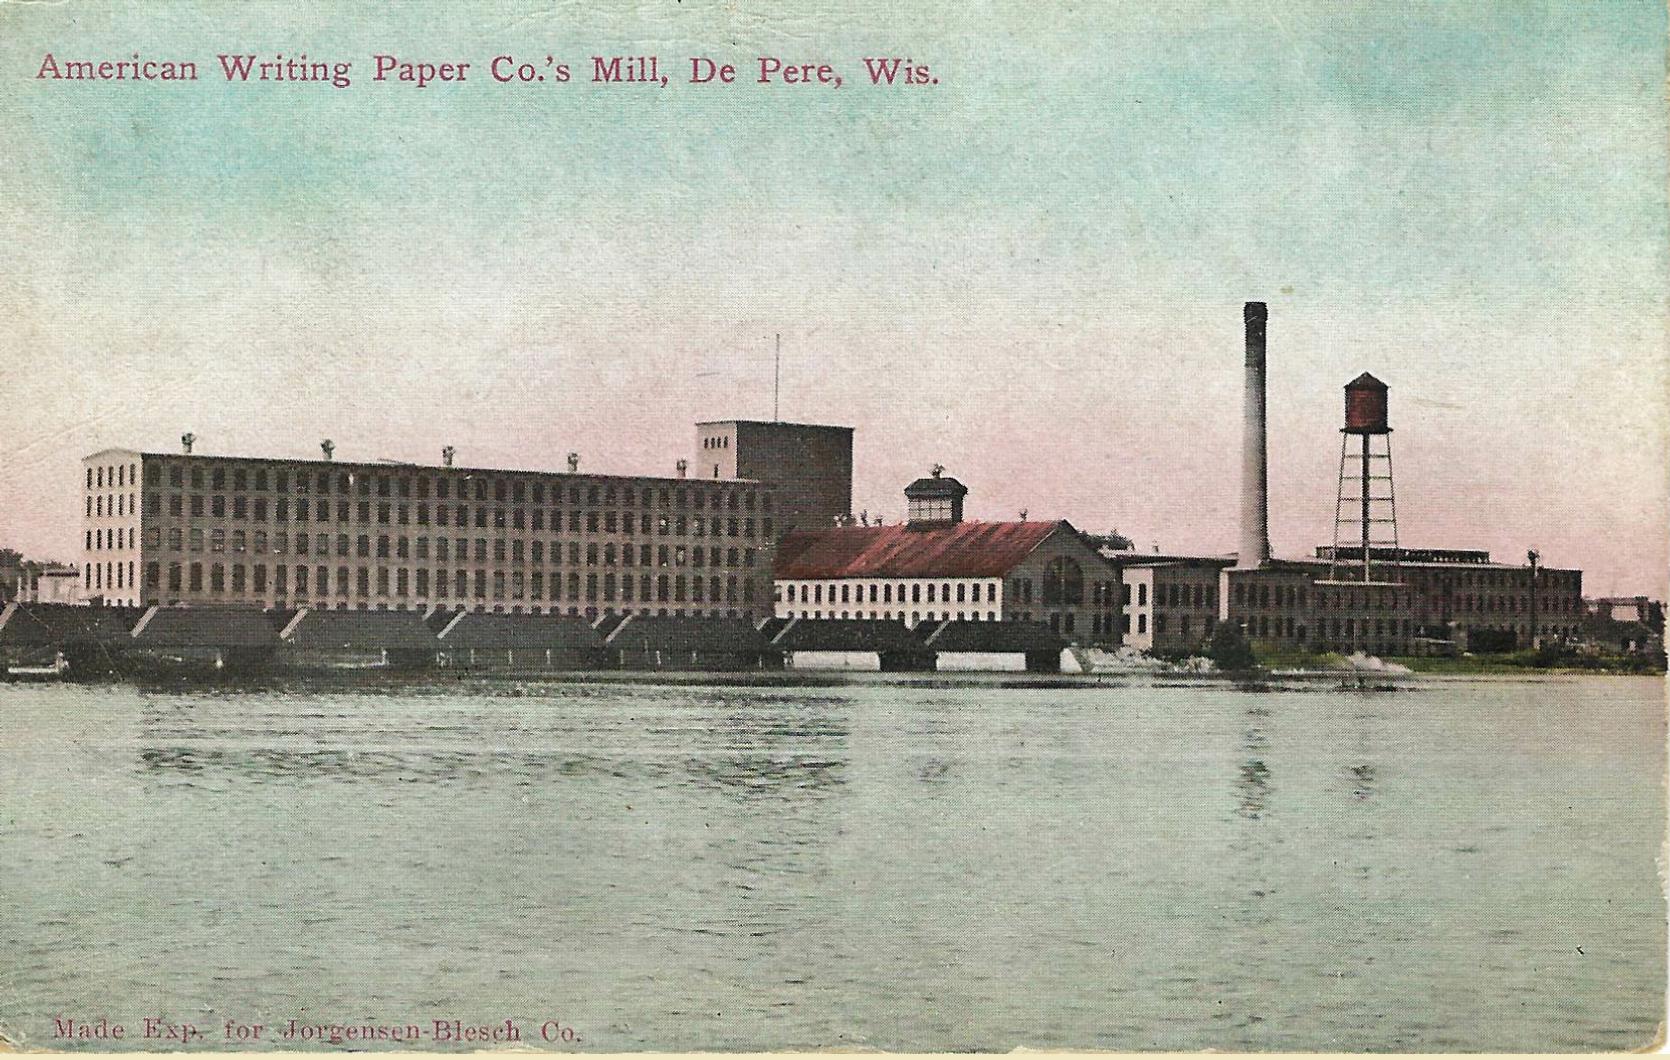 American Writing Paper Co. • 1911